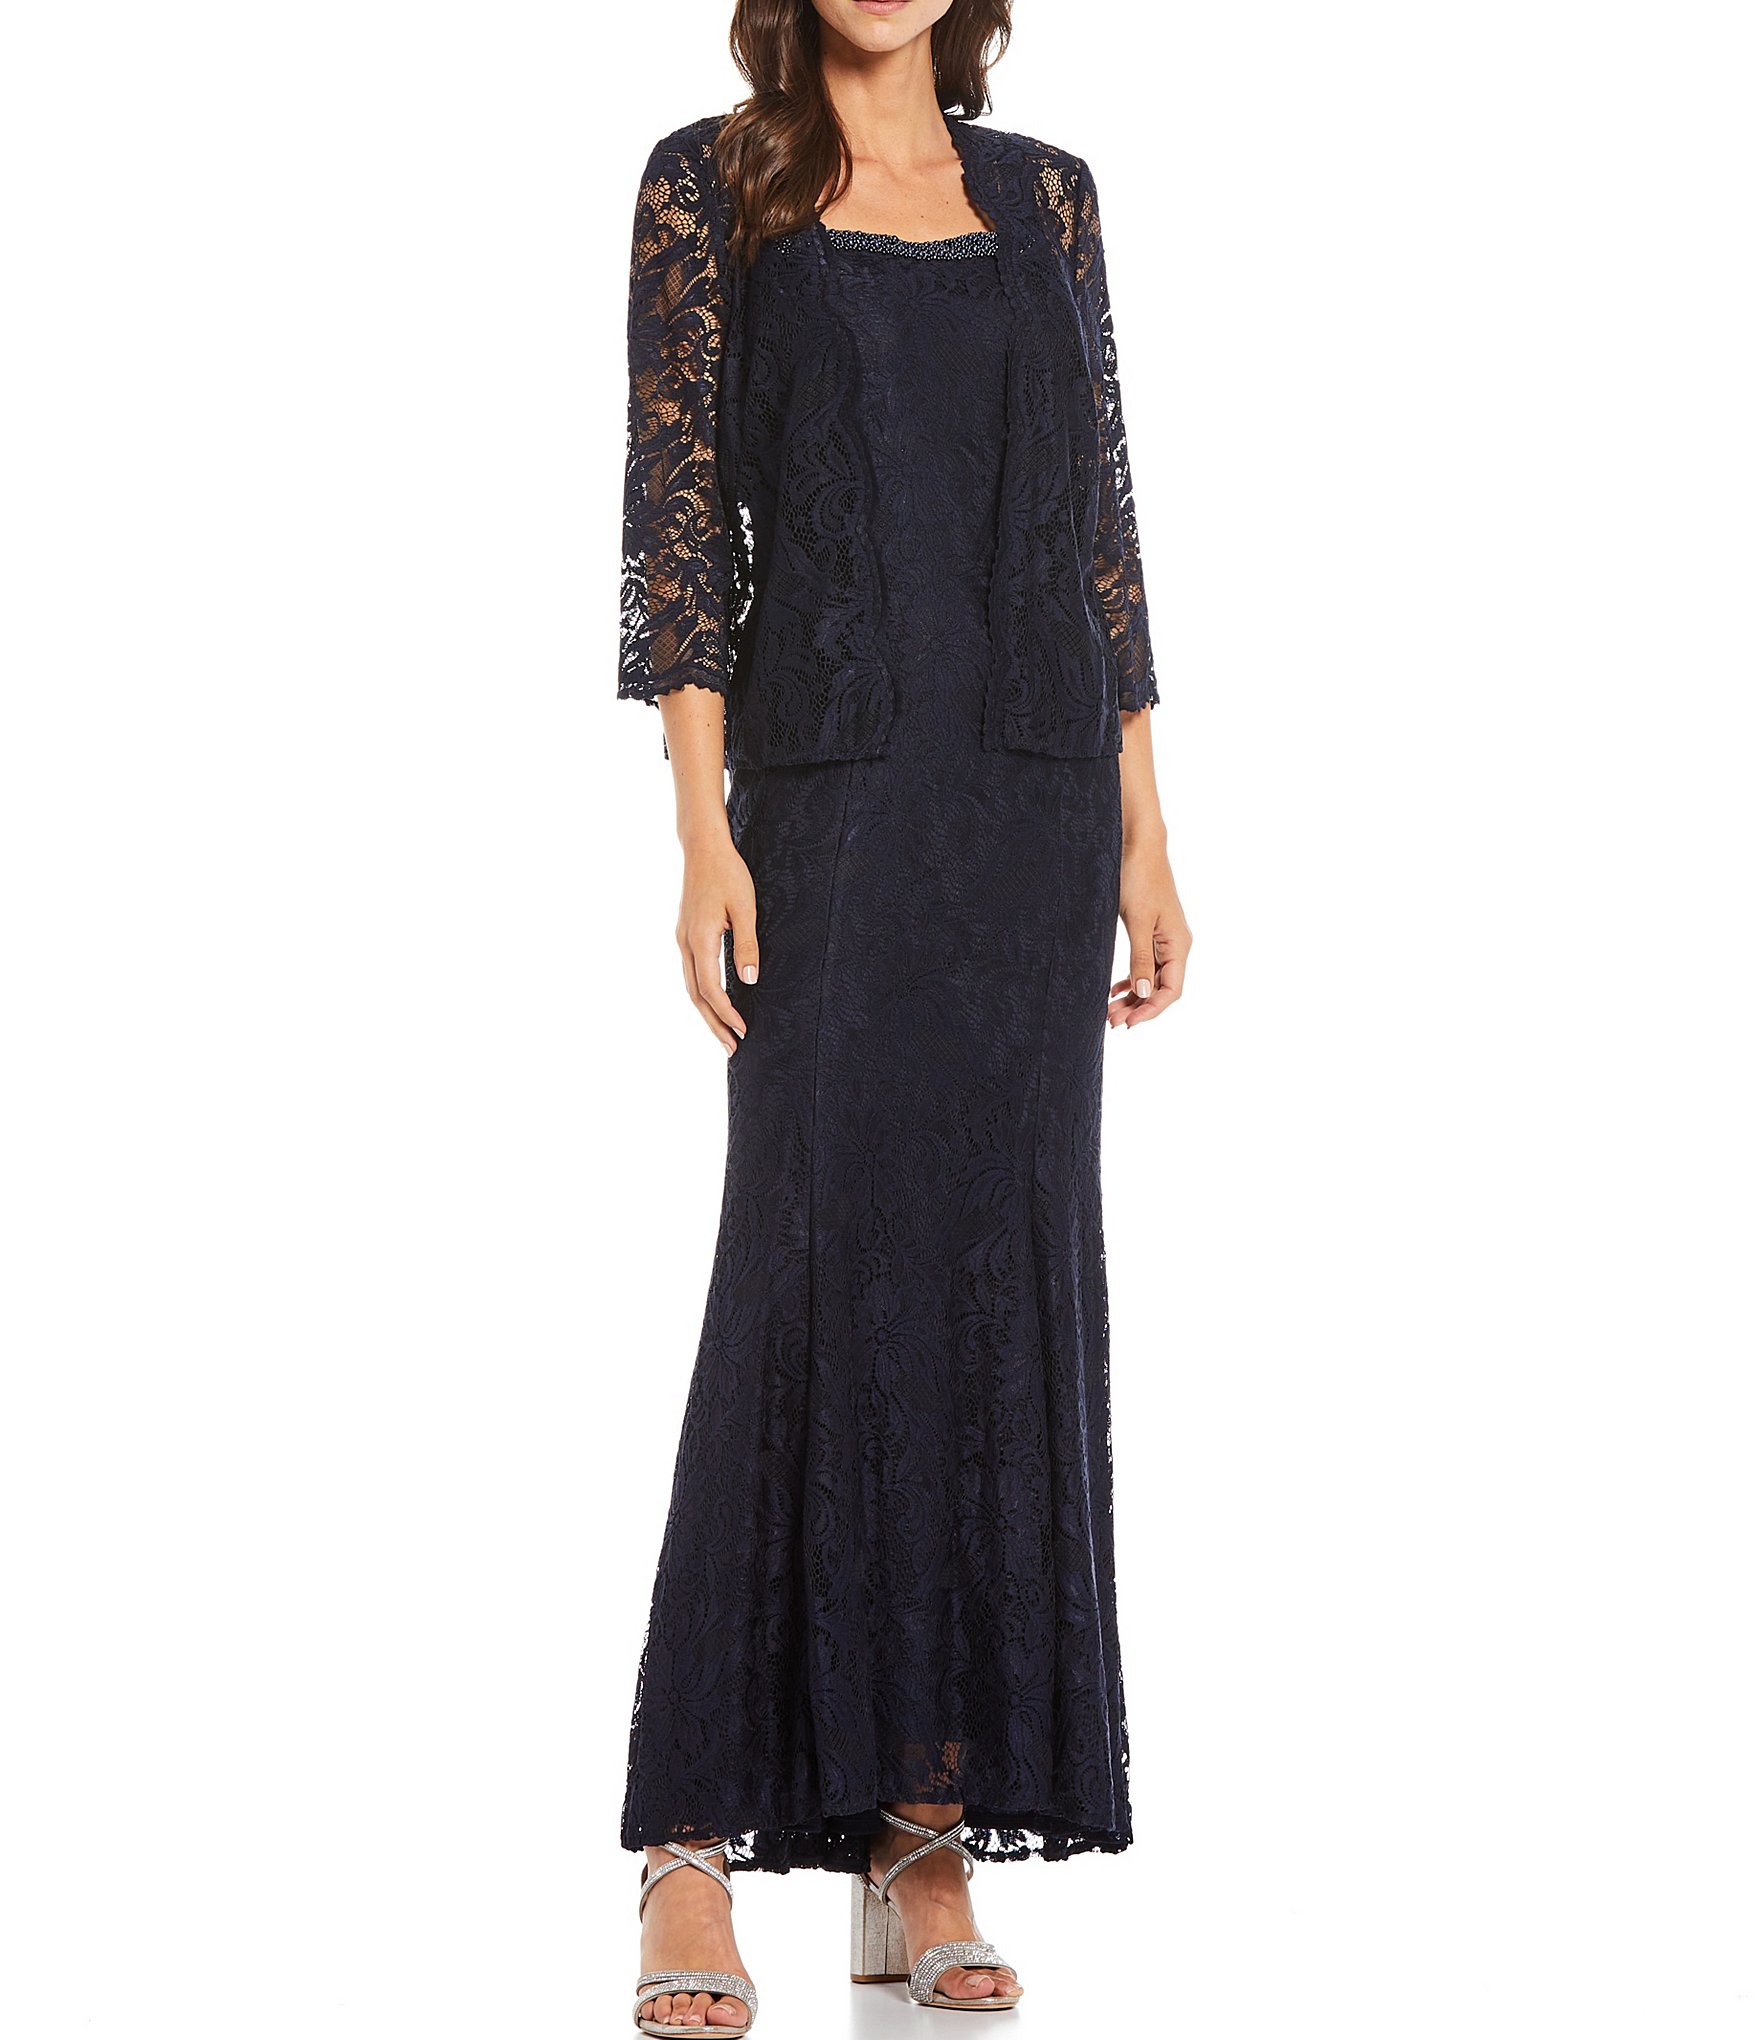 Le Bos Embroidered Stretch Lace 3/4 Sleeve 2-Piece Jacket Dress | Dillard's